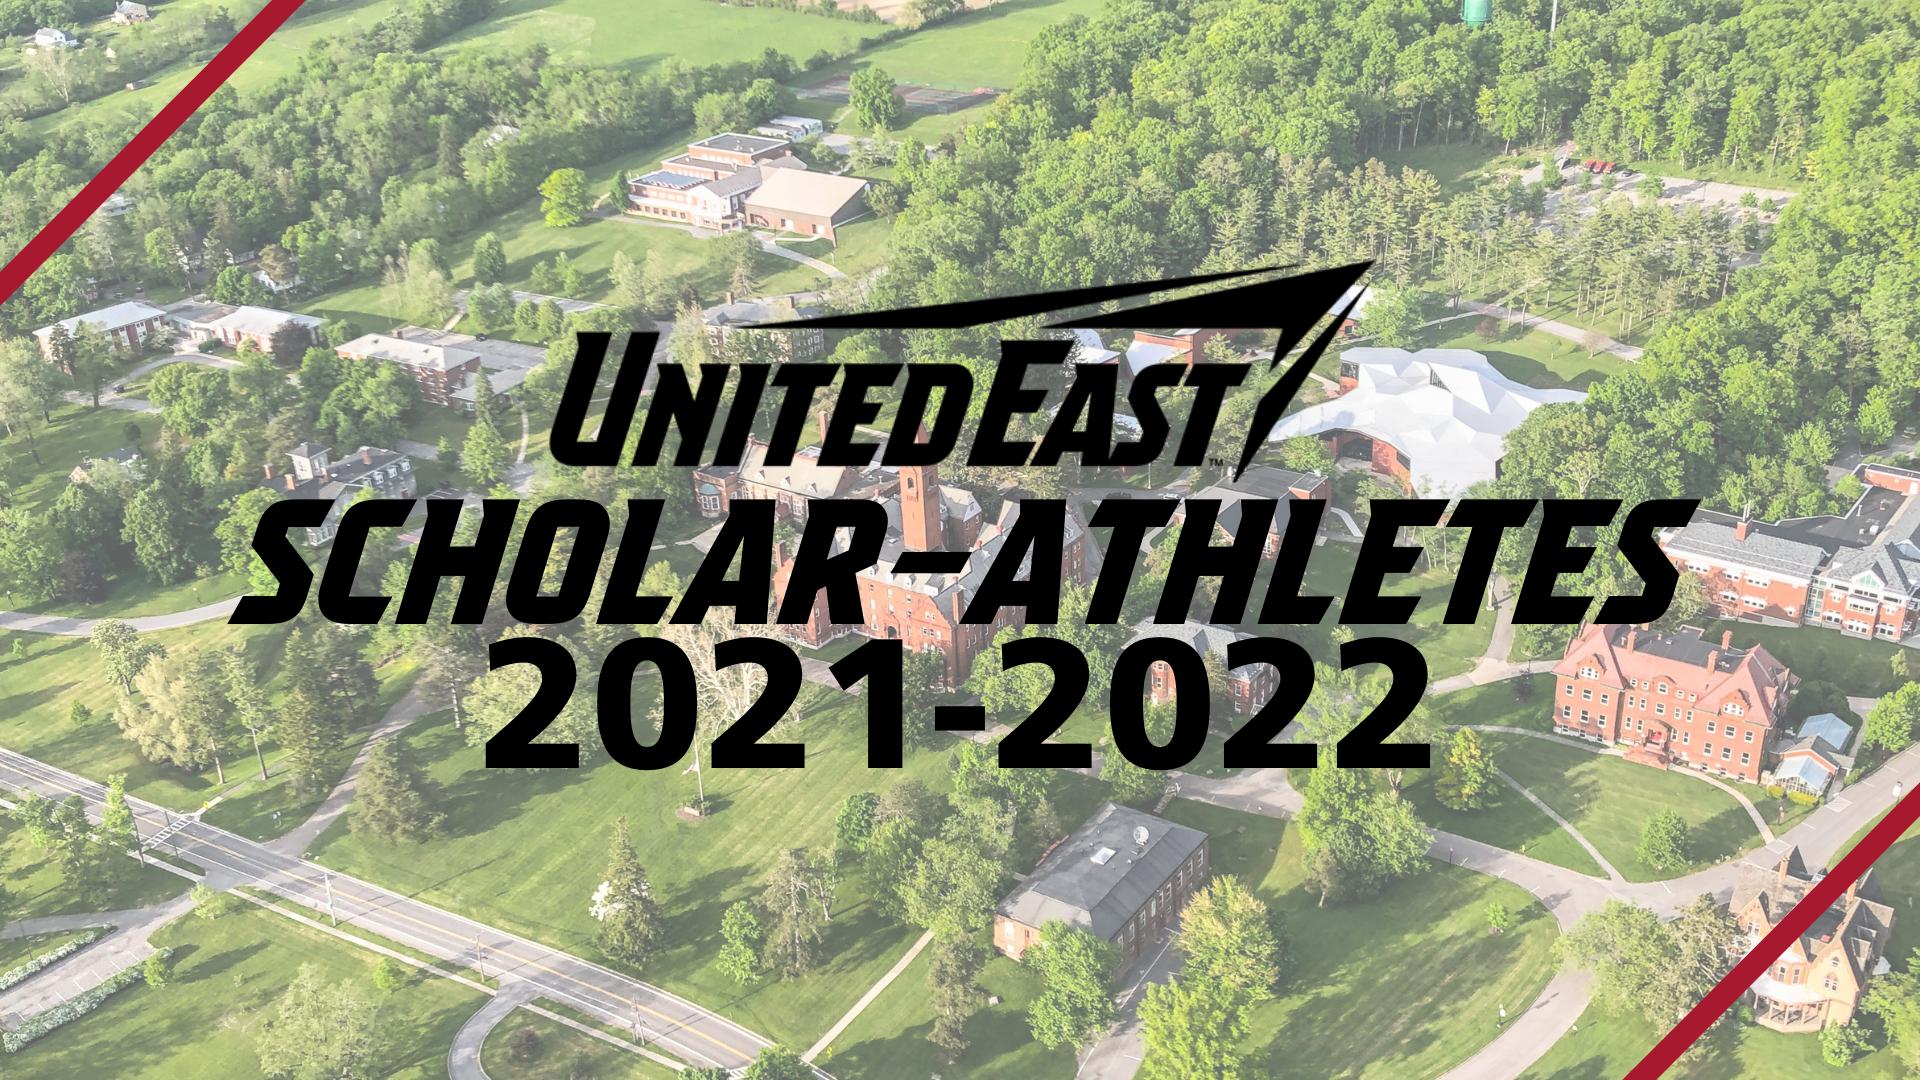 United East releases scholar athletes for 2021-2022